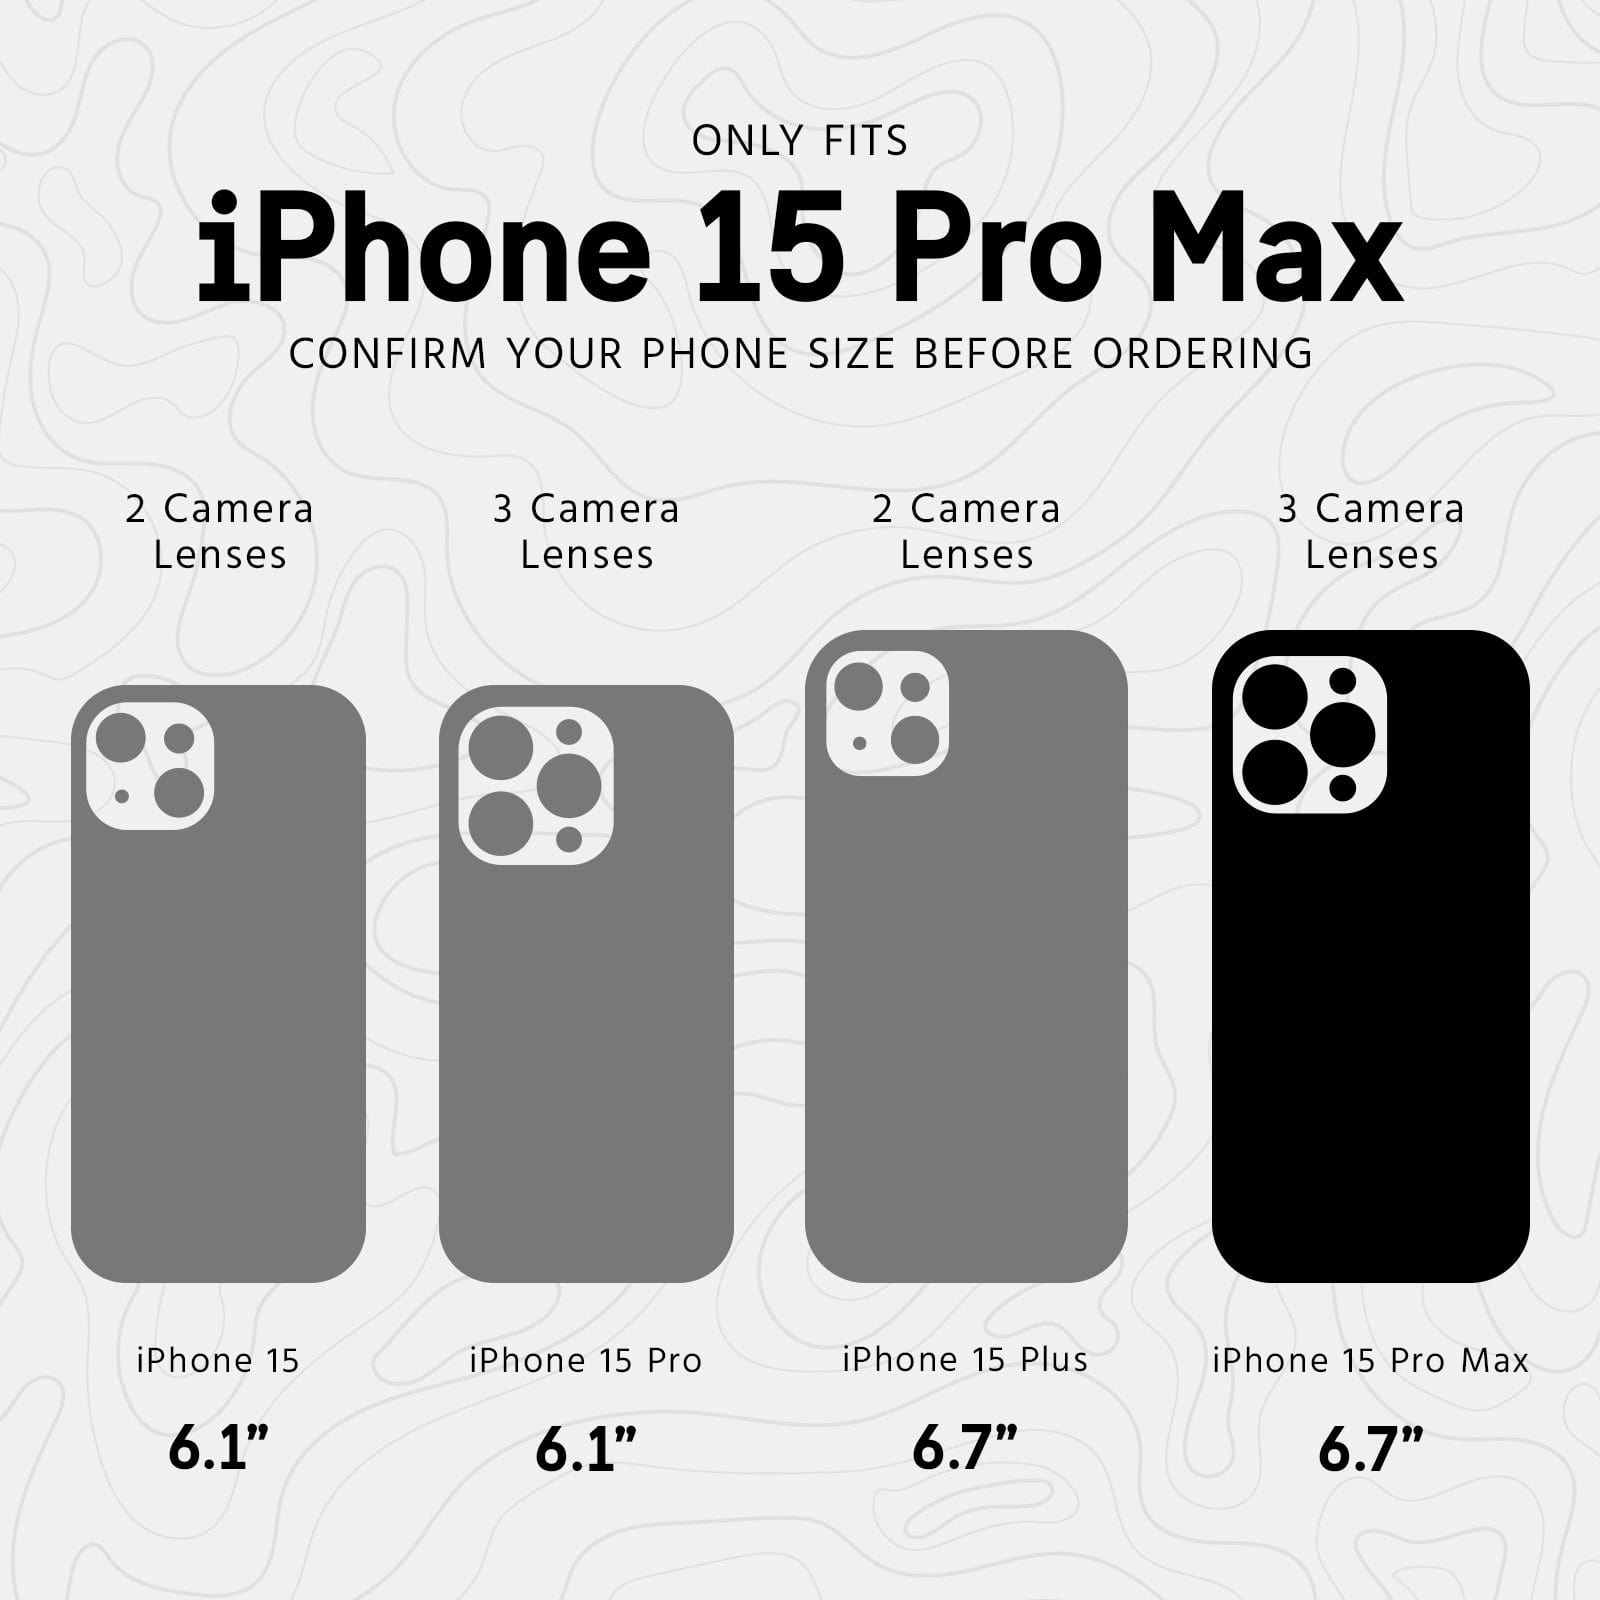 ONLY FITS IPHONE 15 PRO MAX. CONFIRM YOUR DEVICE BEFORE ORDERING